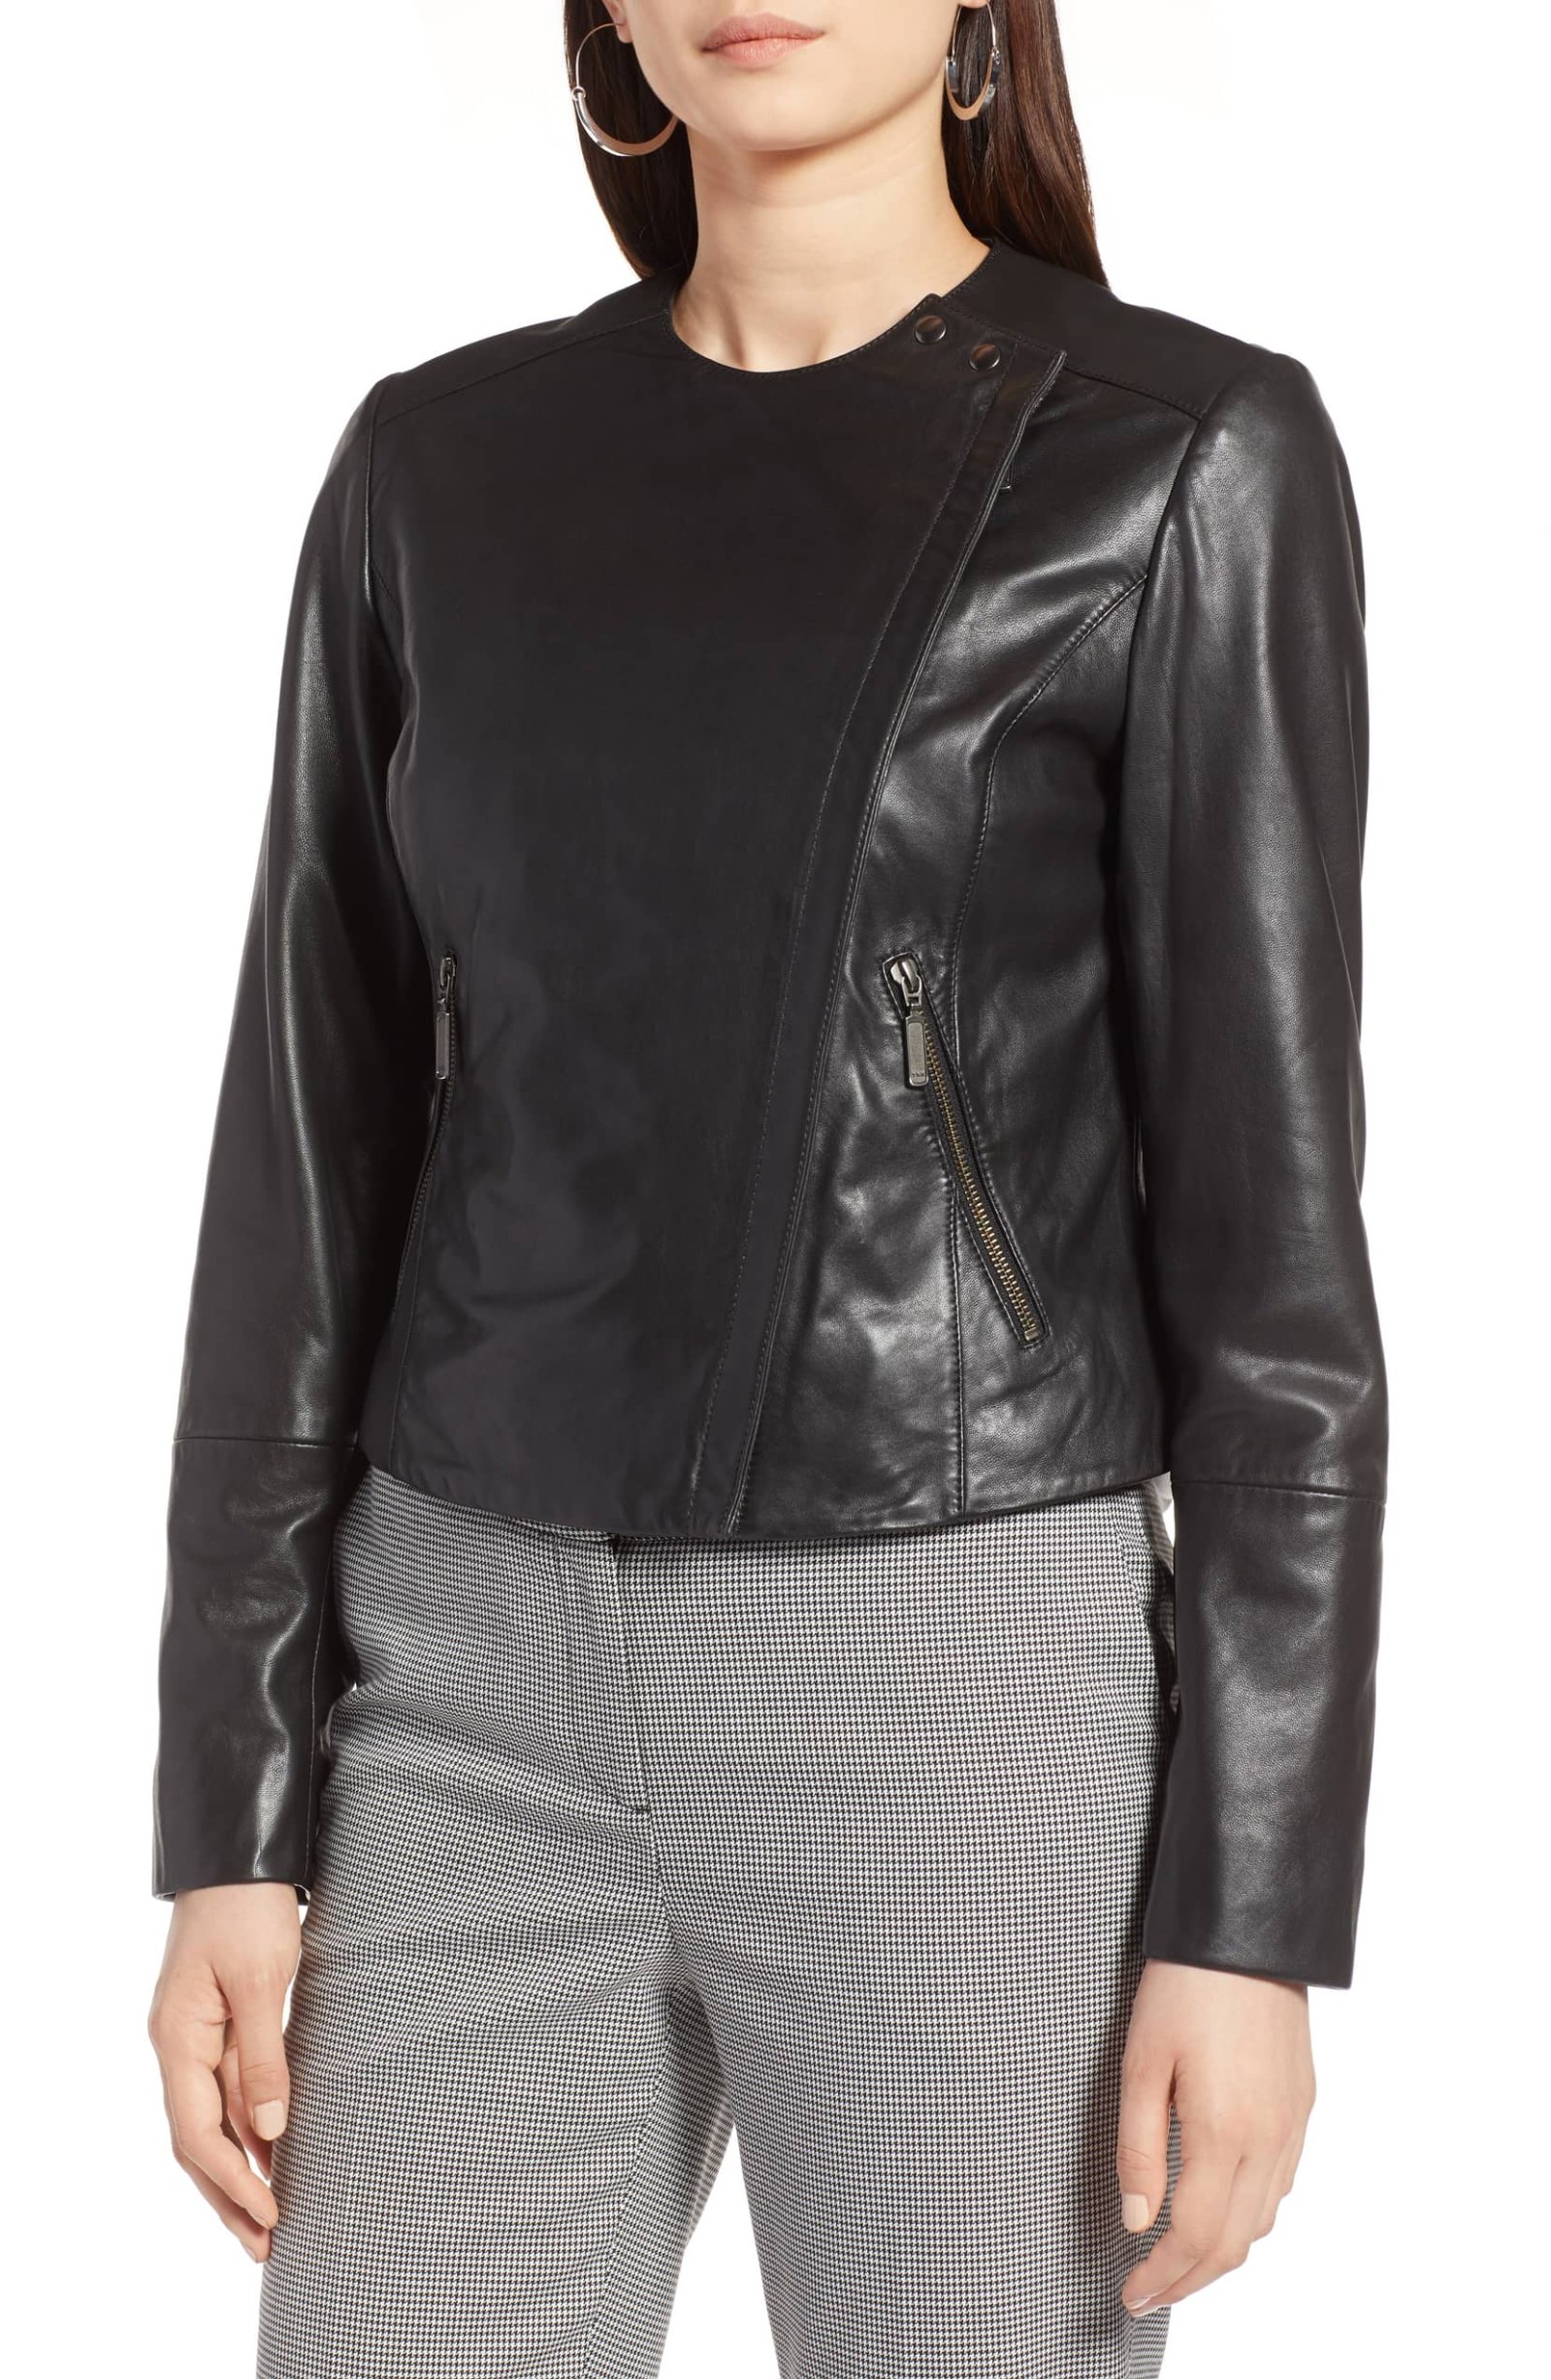 Welcome Fall in Style With This Collarless Leather Jacket | Us Weekly